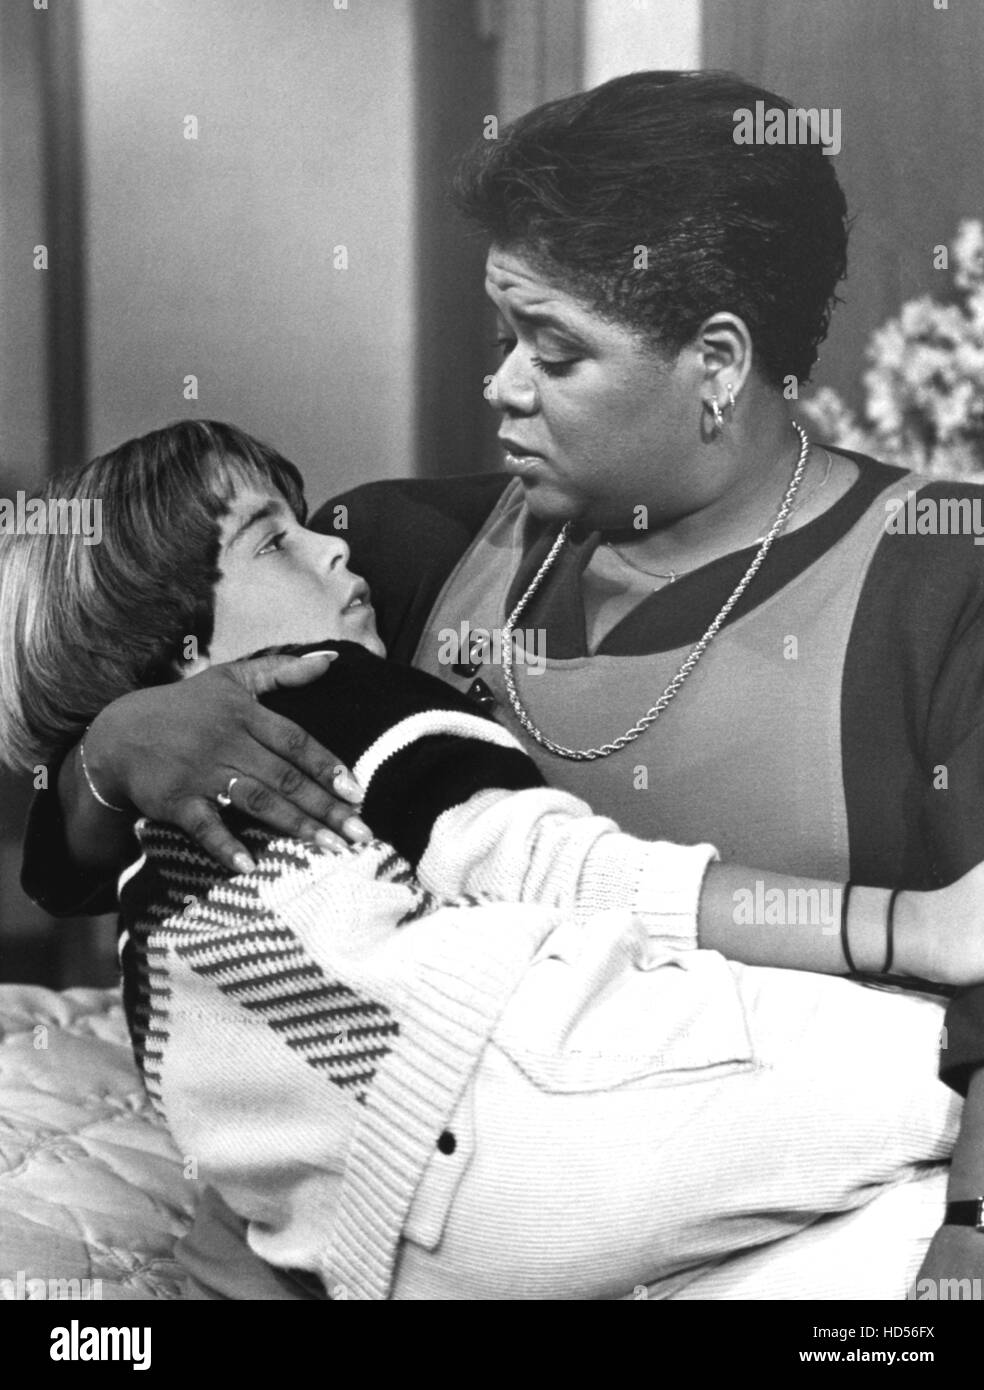 Nell carter joey lawrence